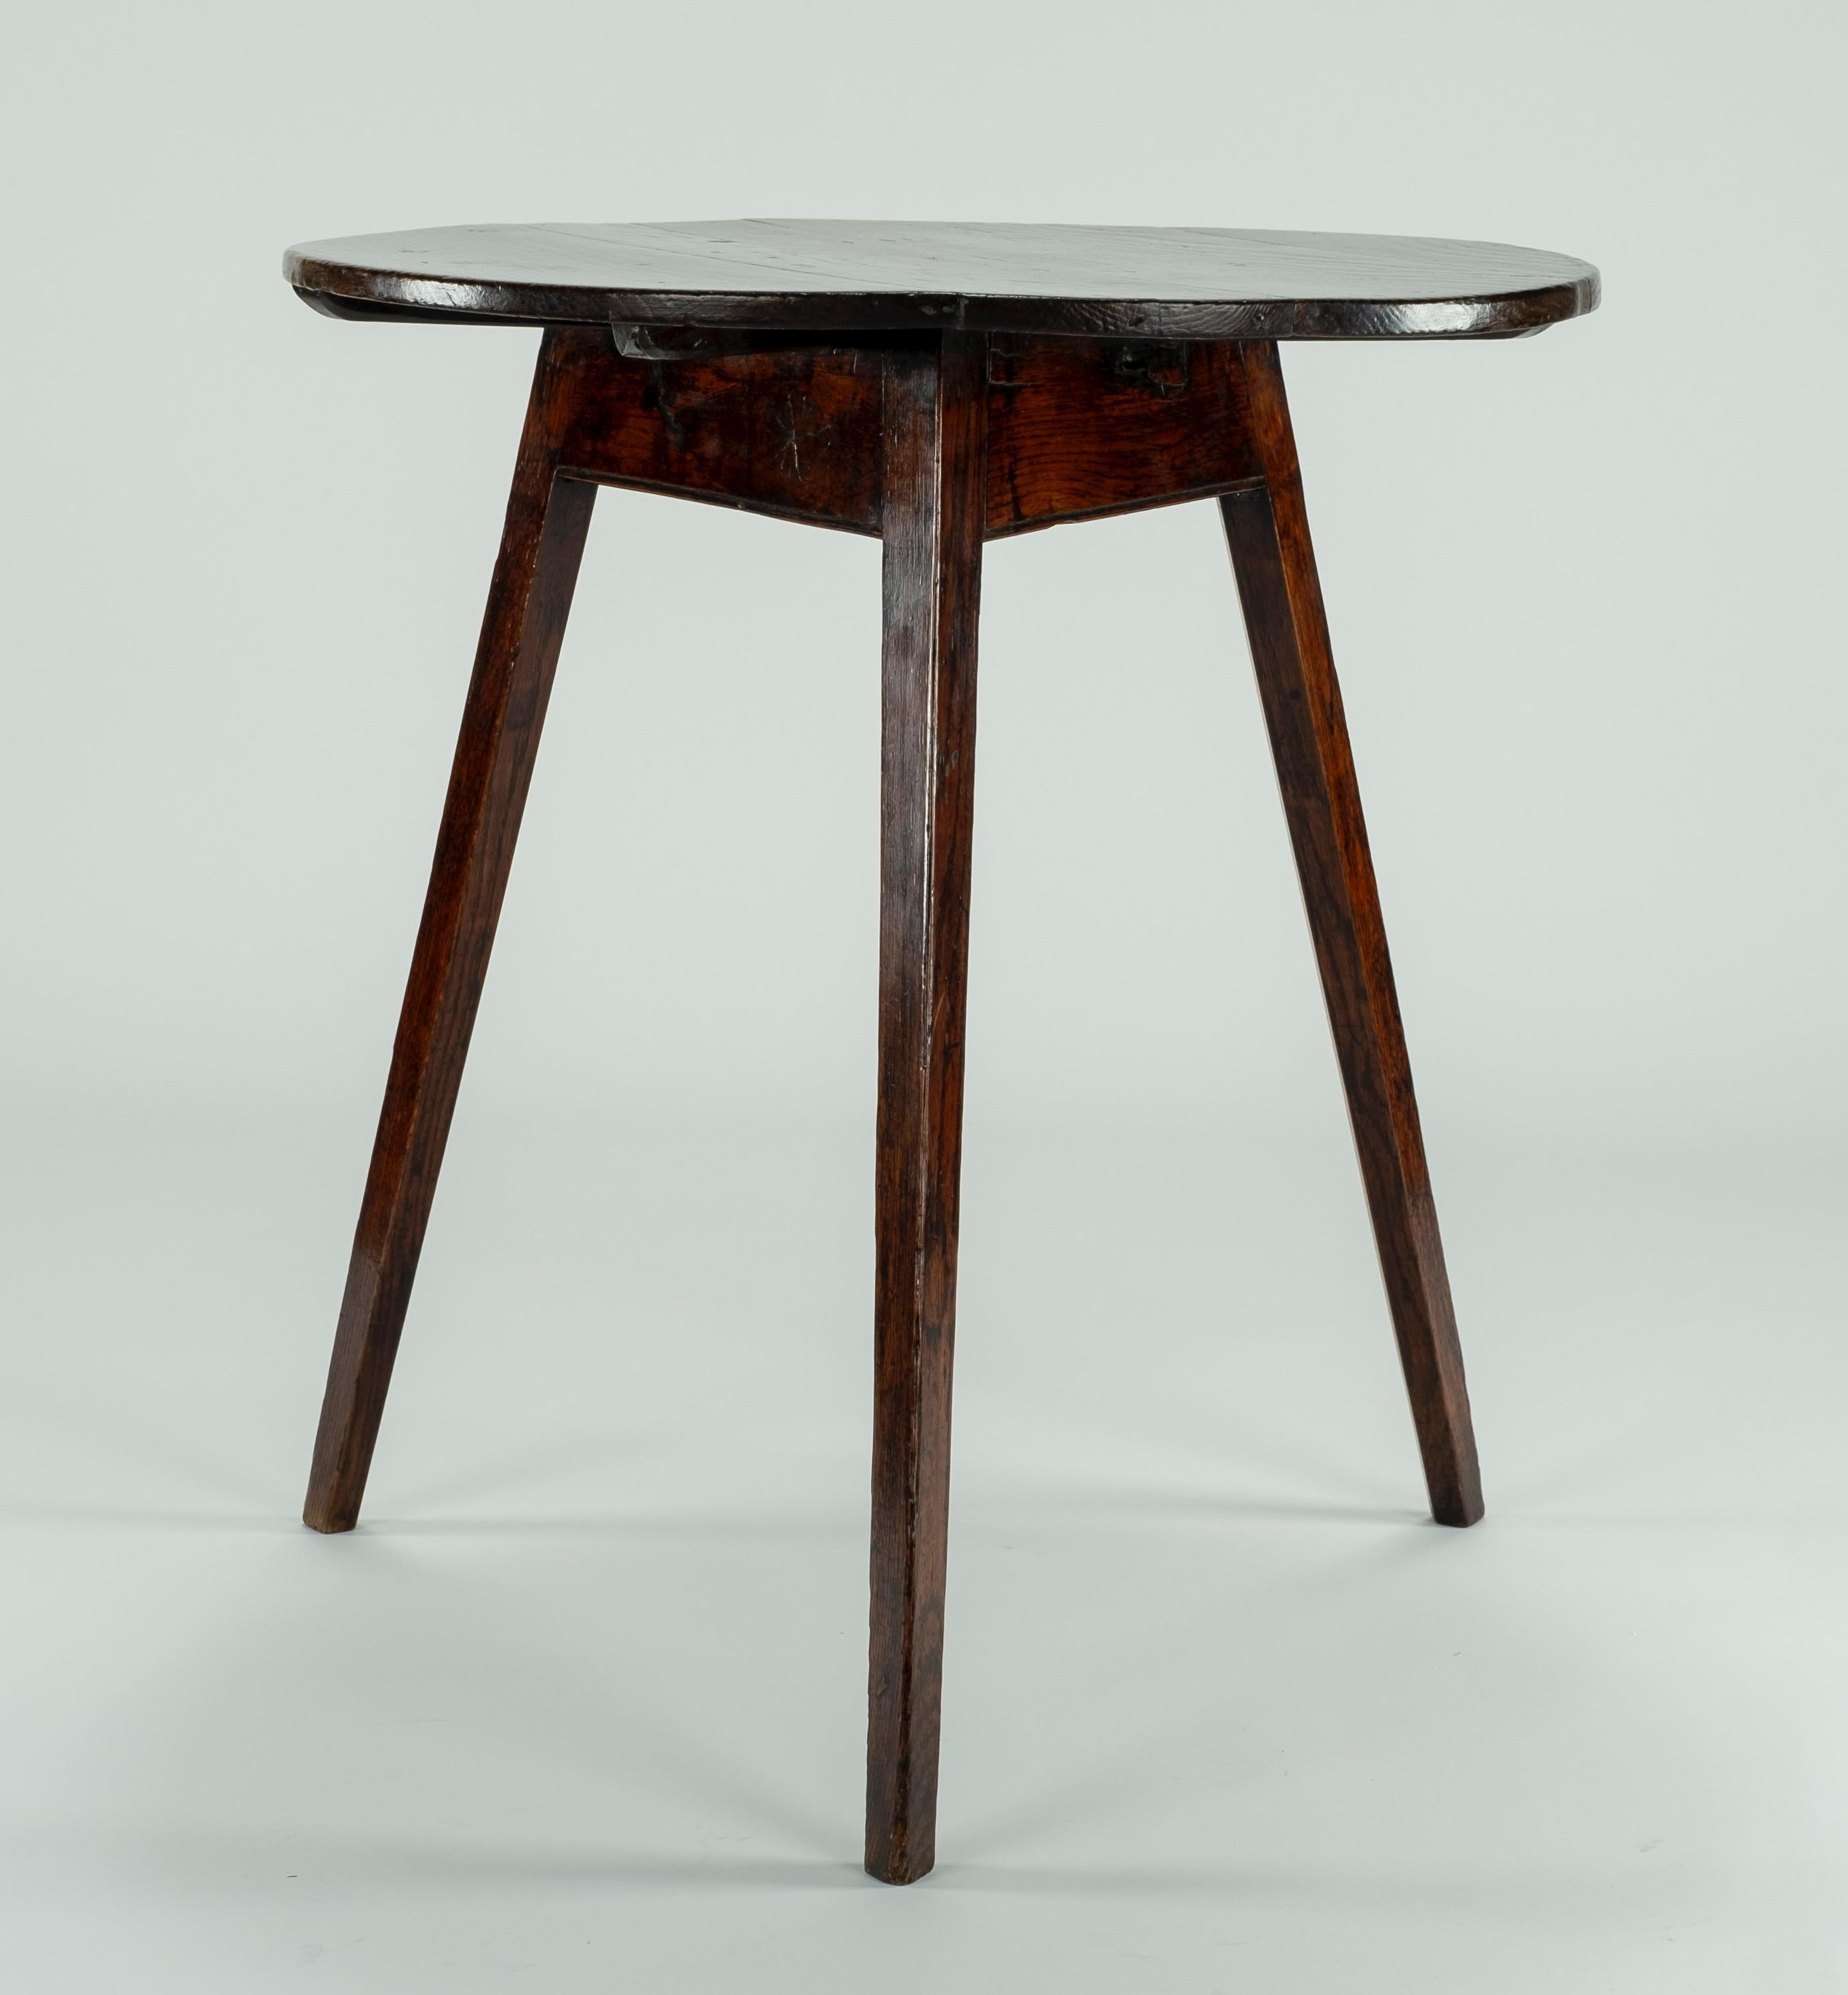 19th century oak cricket table with a flat apron on 3 slightly splayed legs.